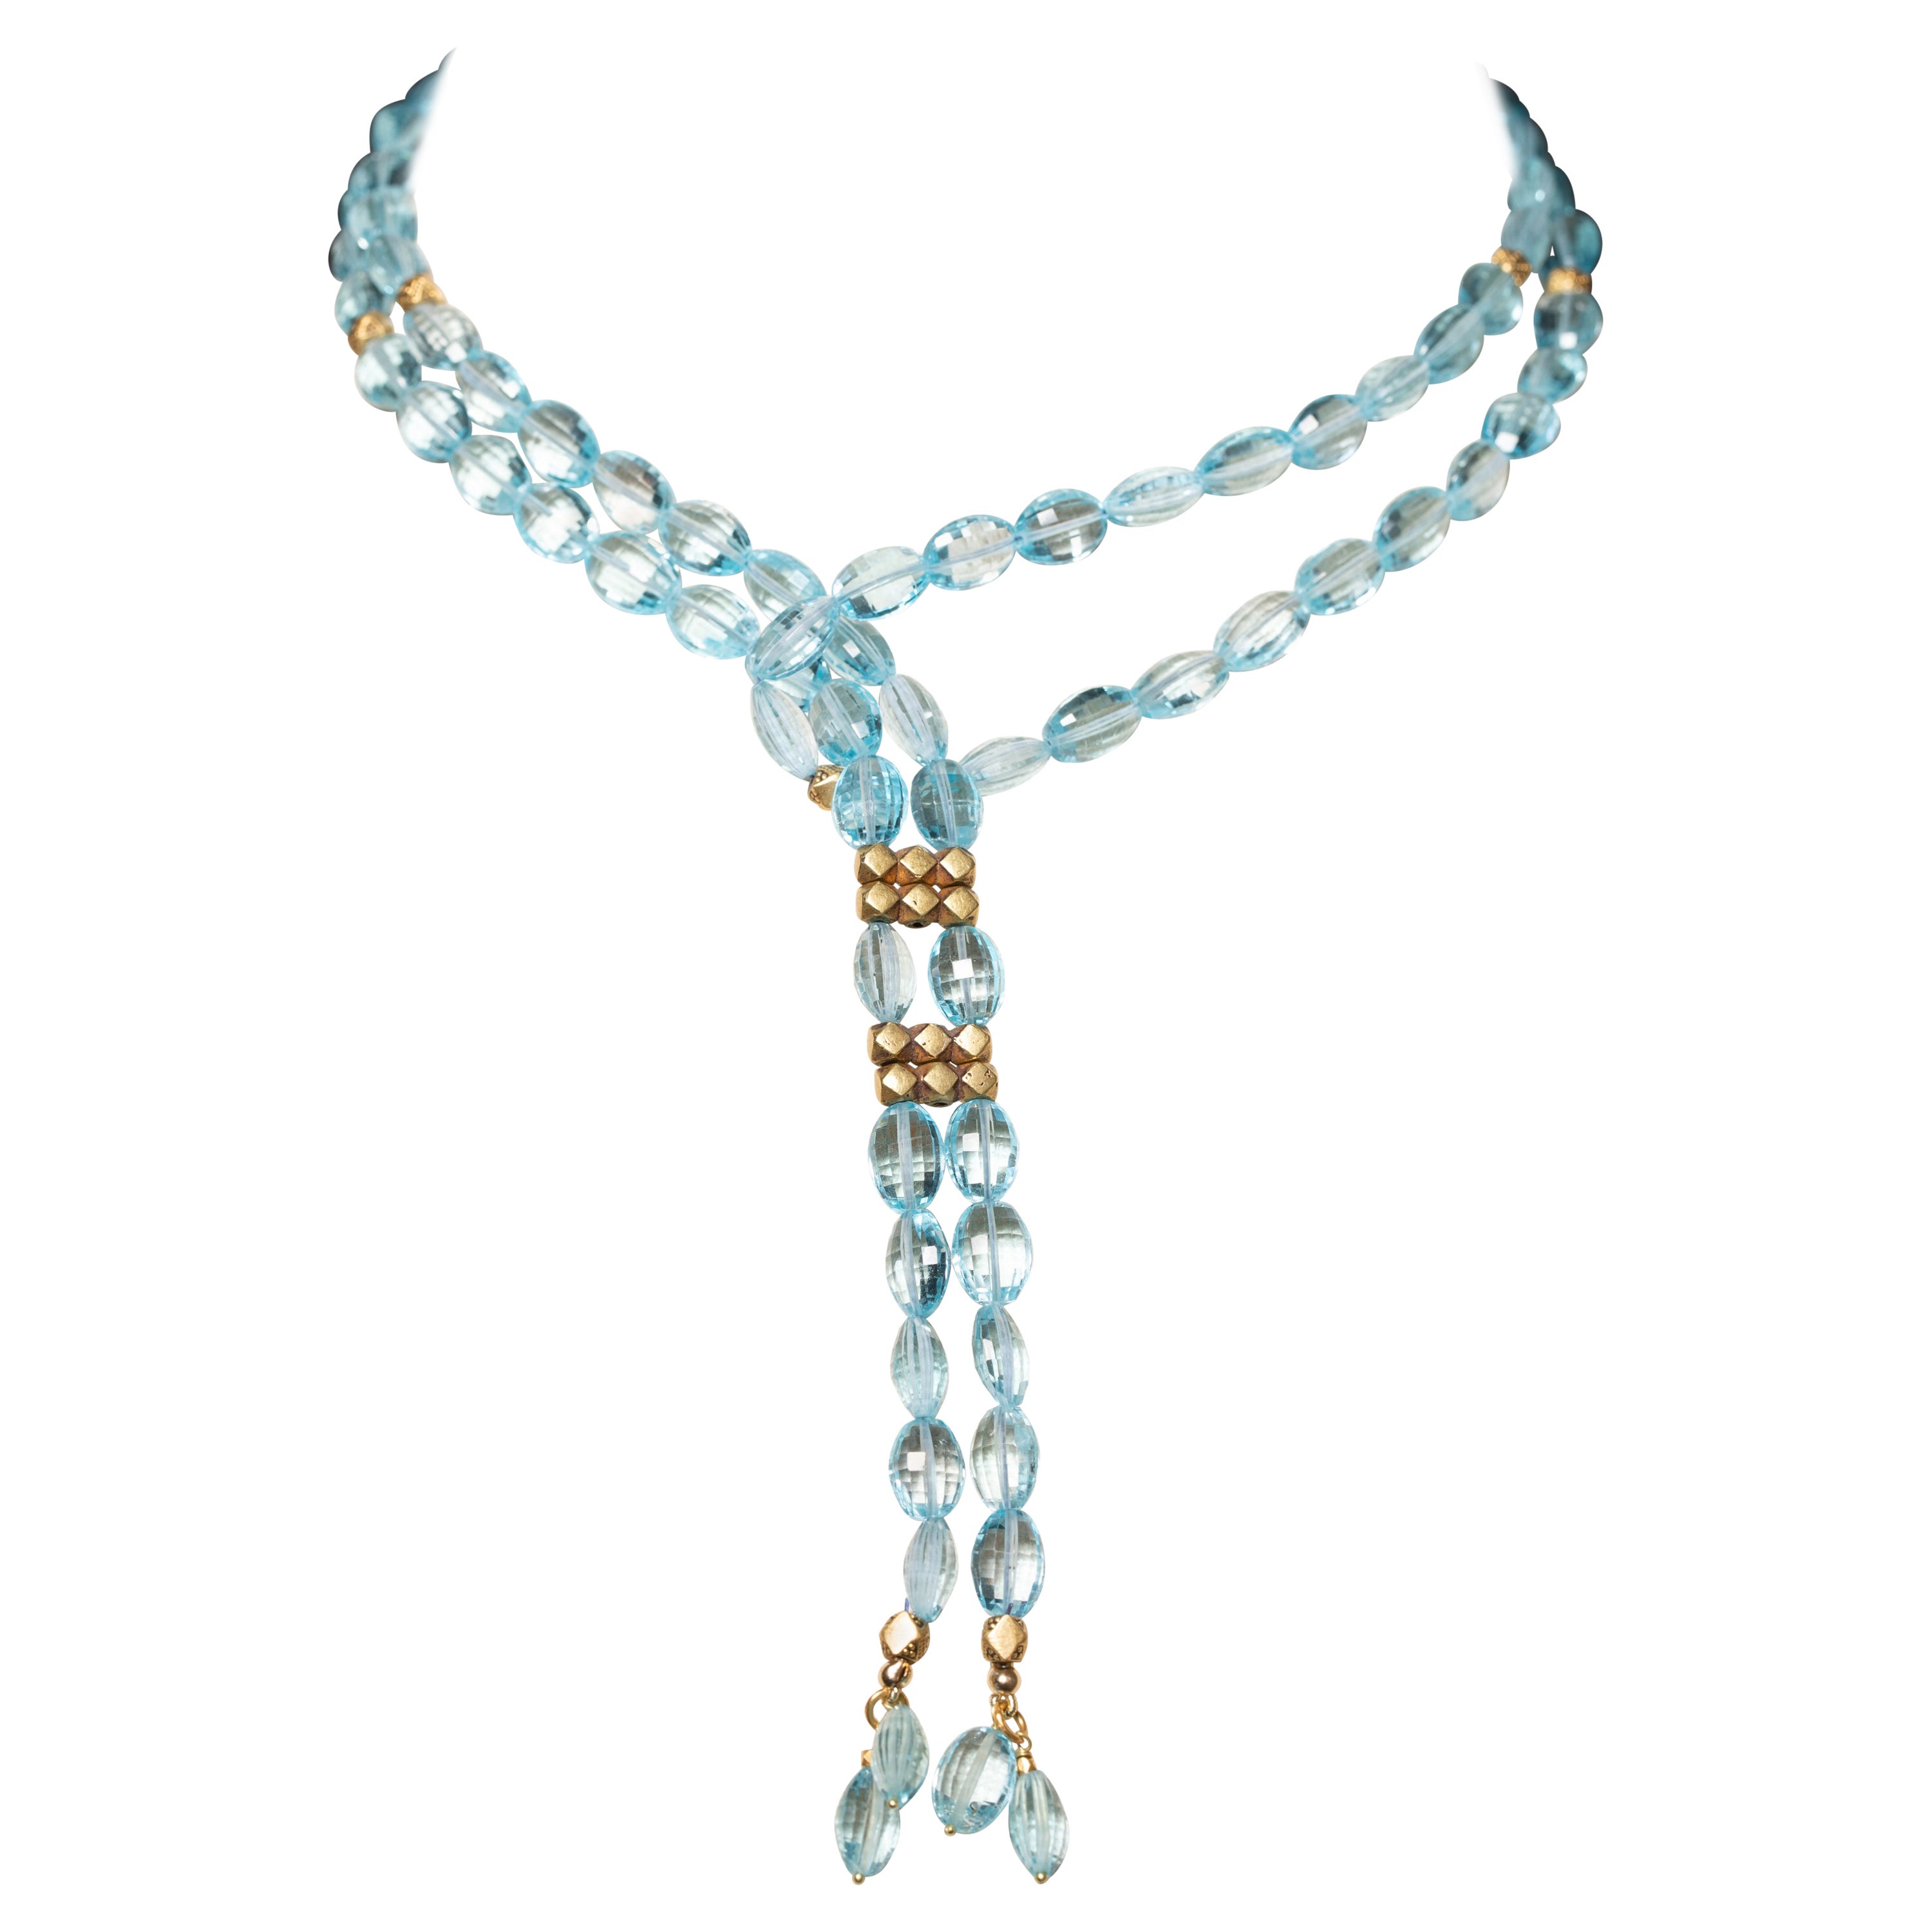 Blue Topaz and 22K Gold Lariat Rope Necklace by Deborah Lockhart Phillips